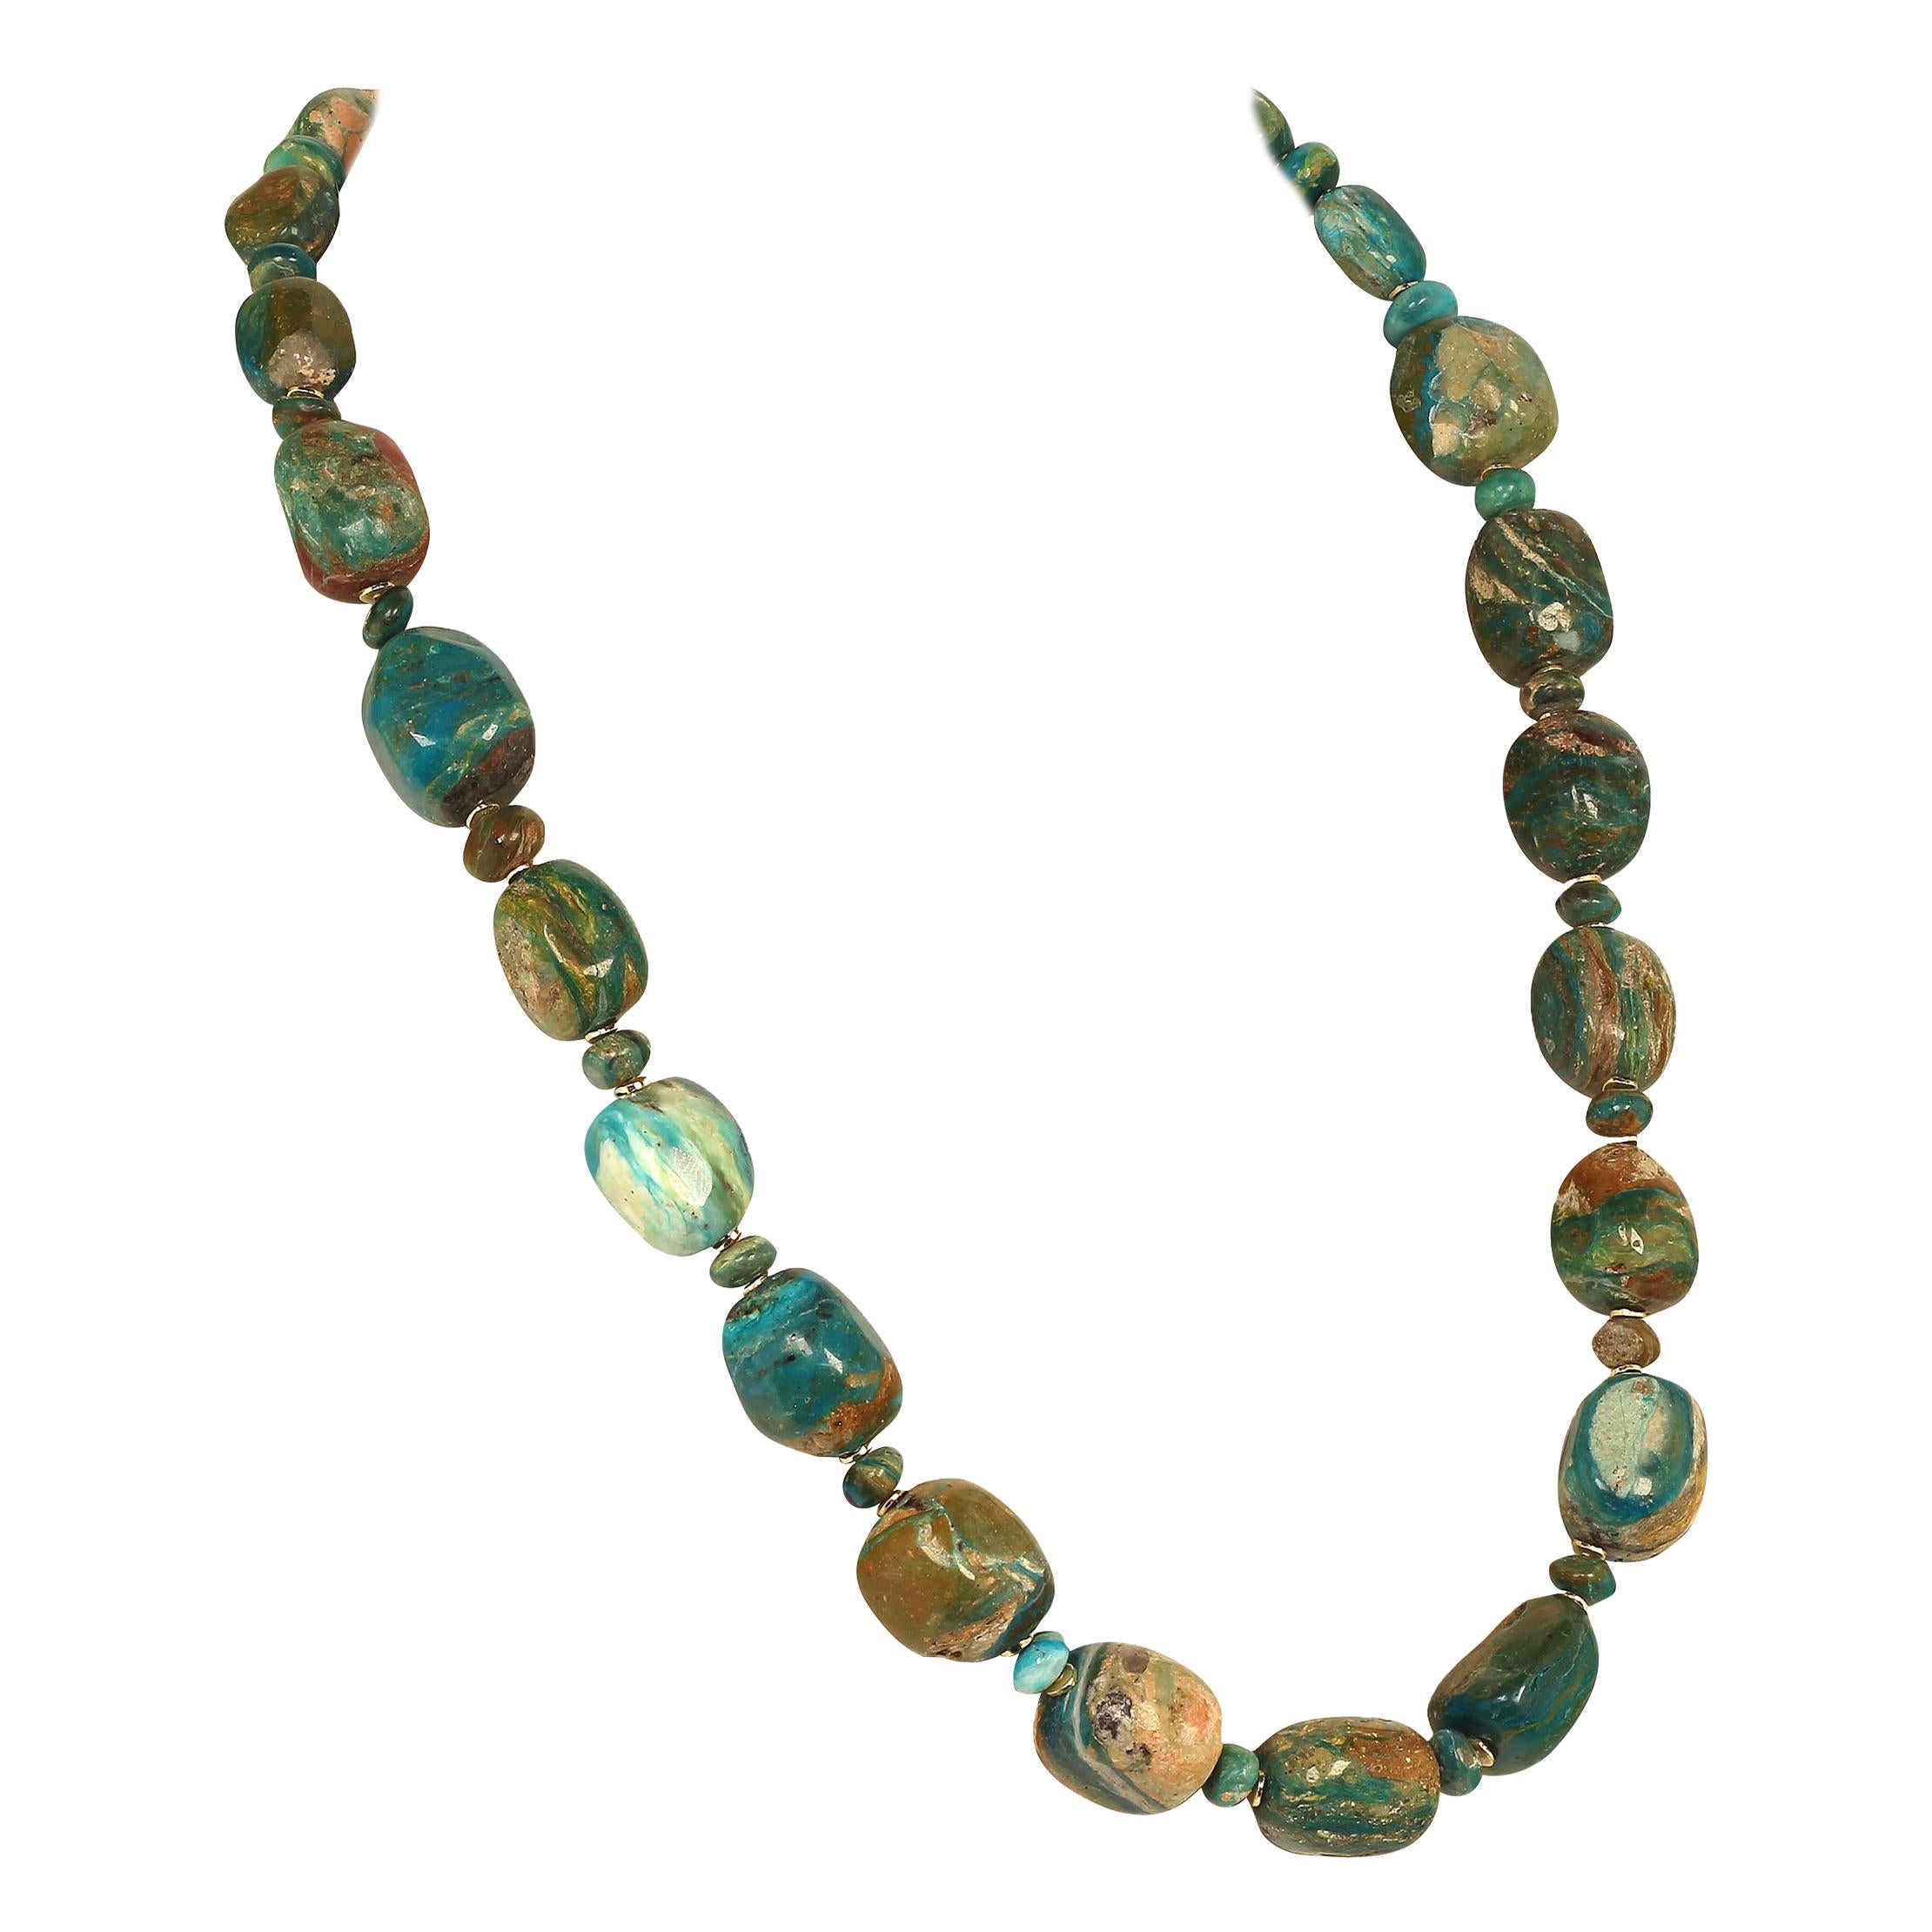 Rustic Blue and Tan Peruvian Opal Cube Necklace with Goldy Accents